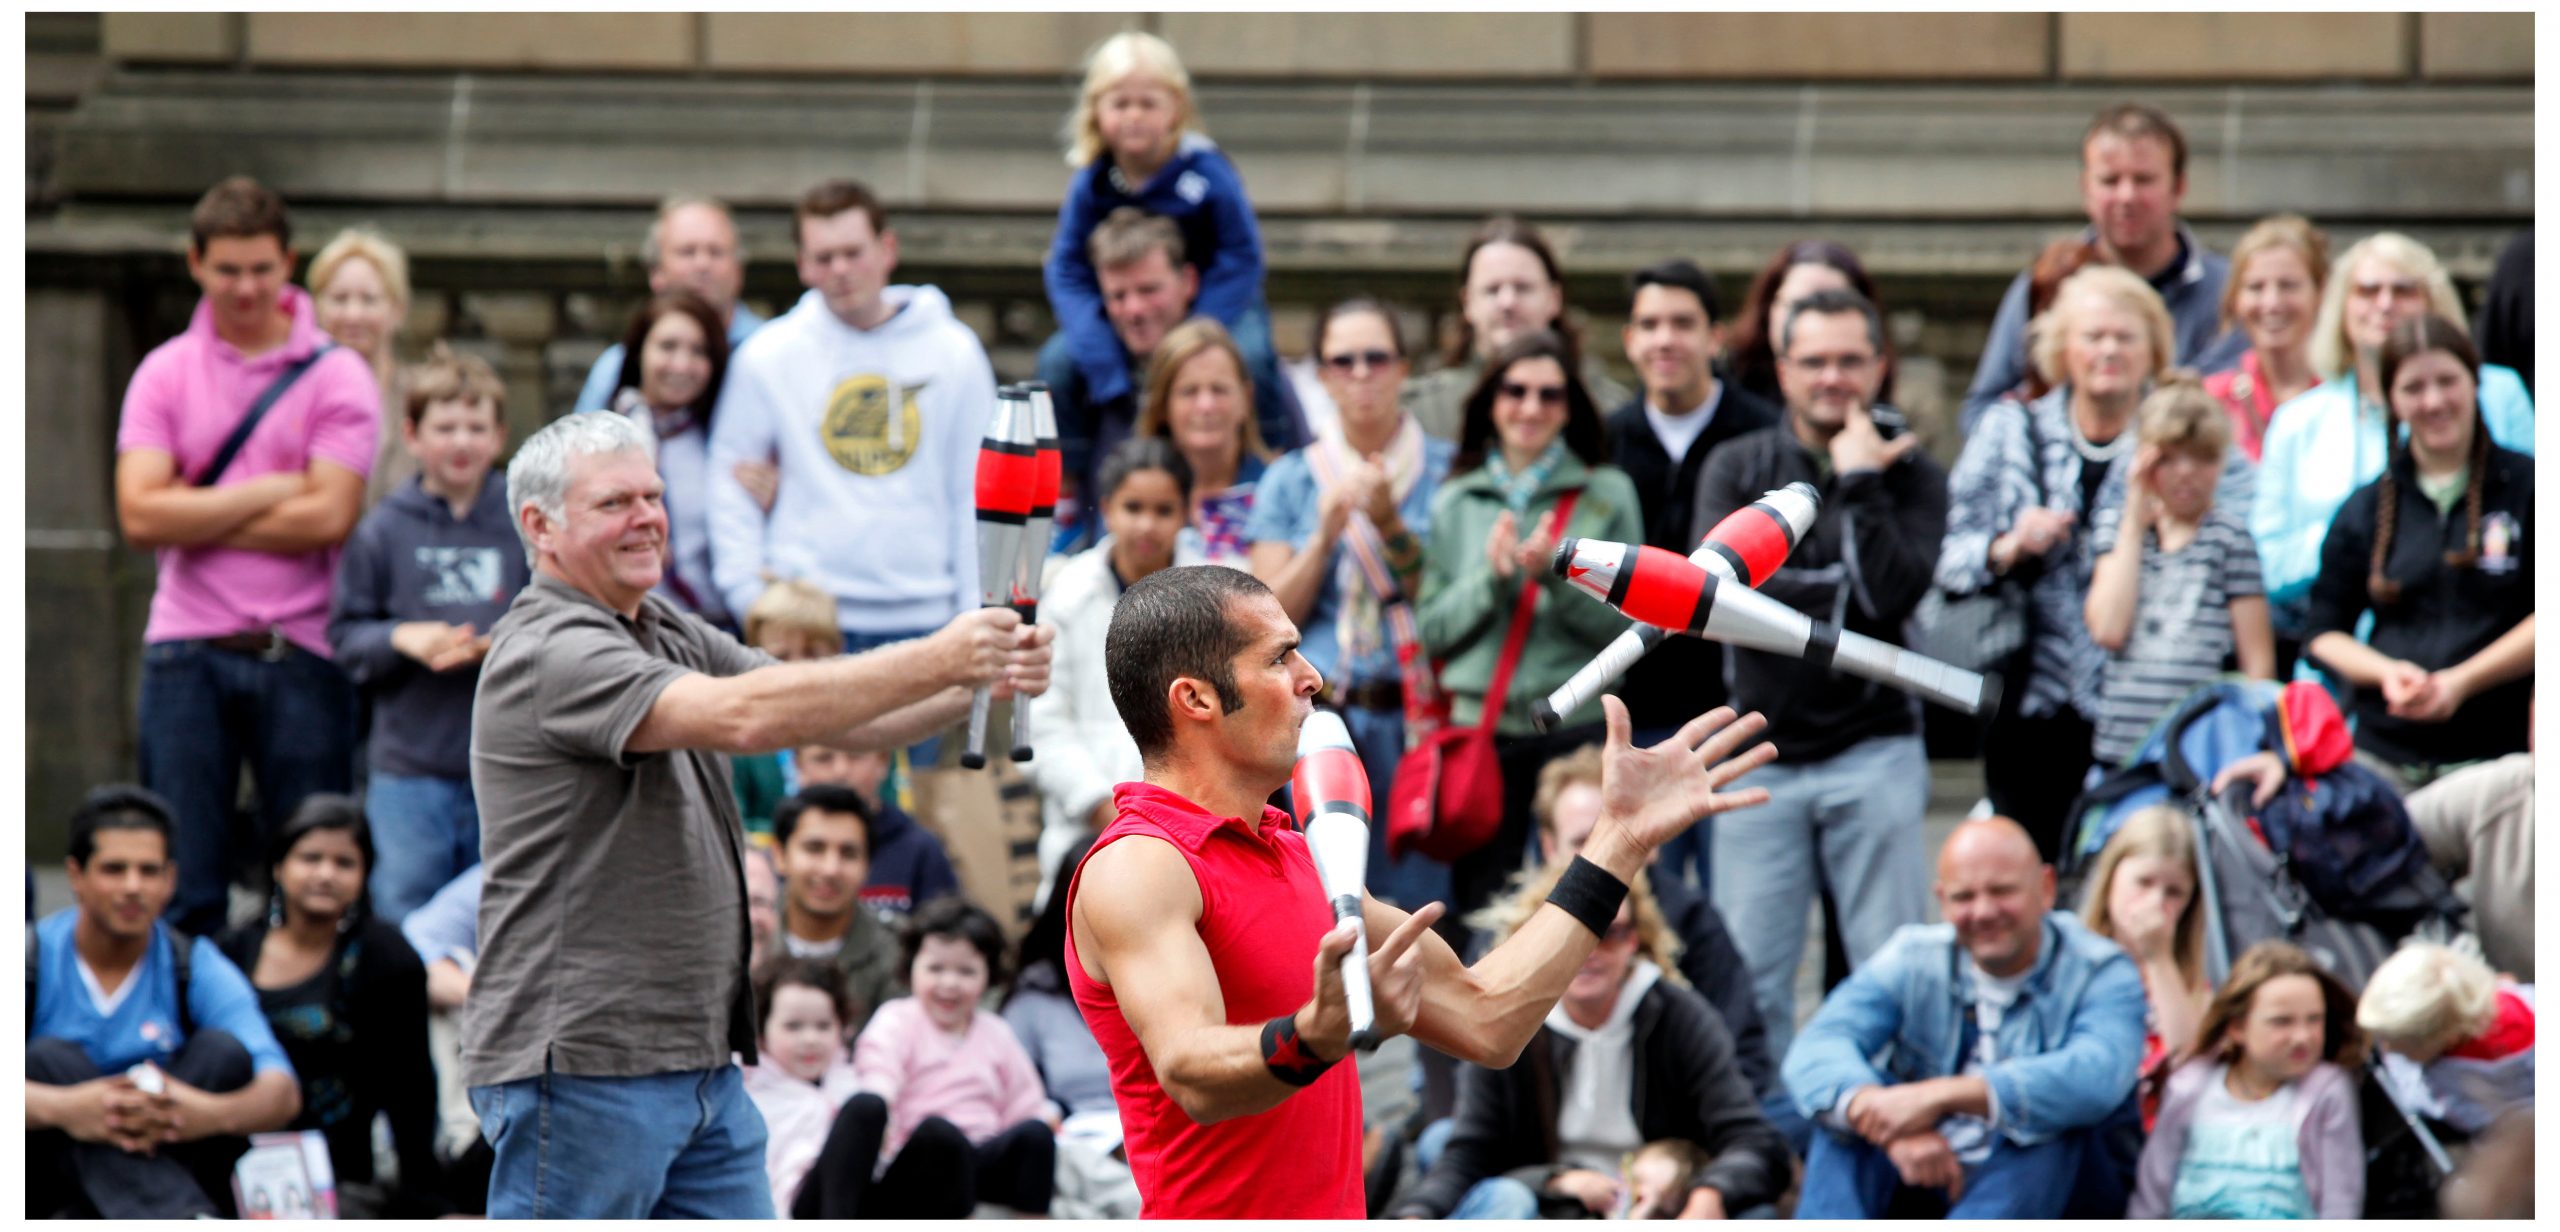 A juggler performs for a crowd during the Fringe festival in Edinburgh